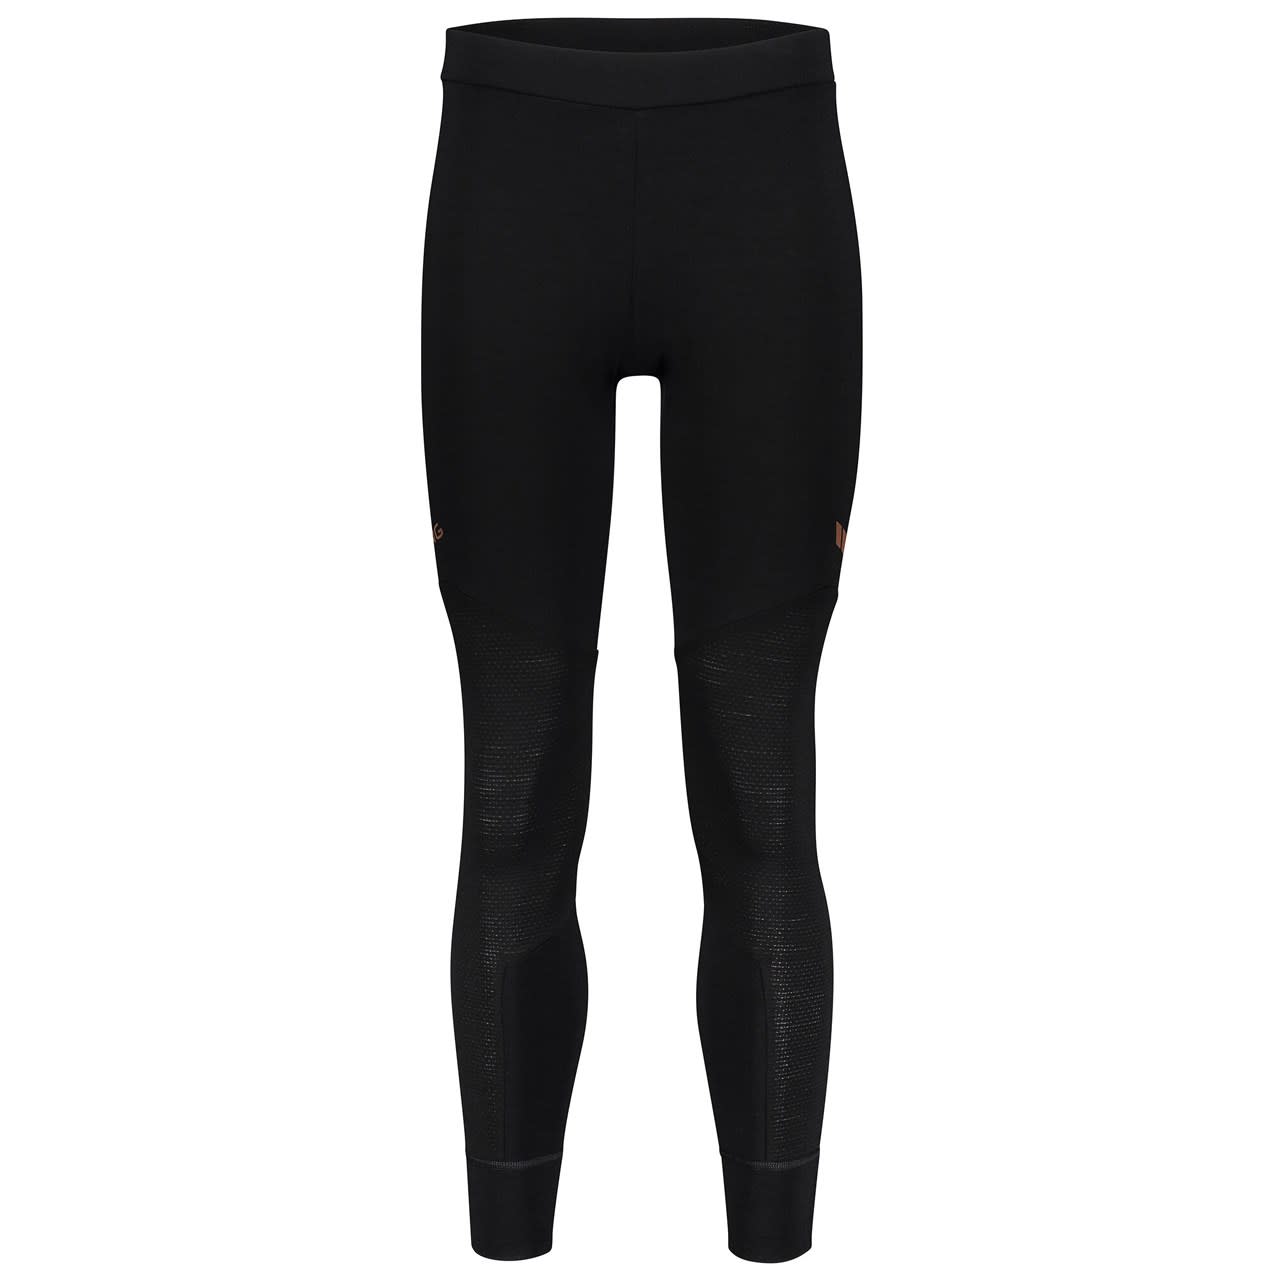 Ulvang Men's Pace Tights Black/Copper